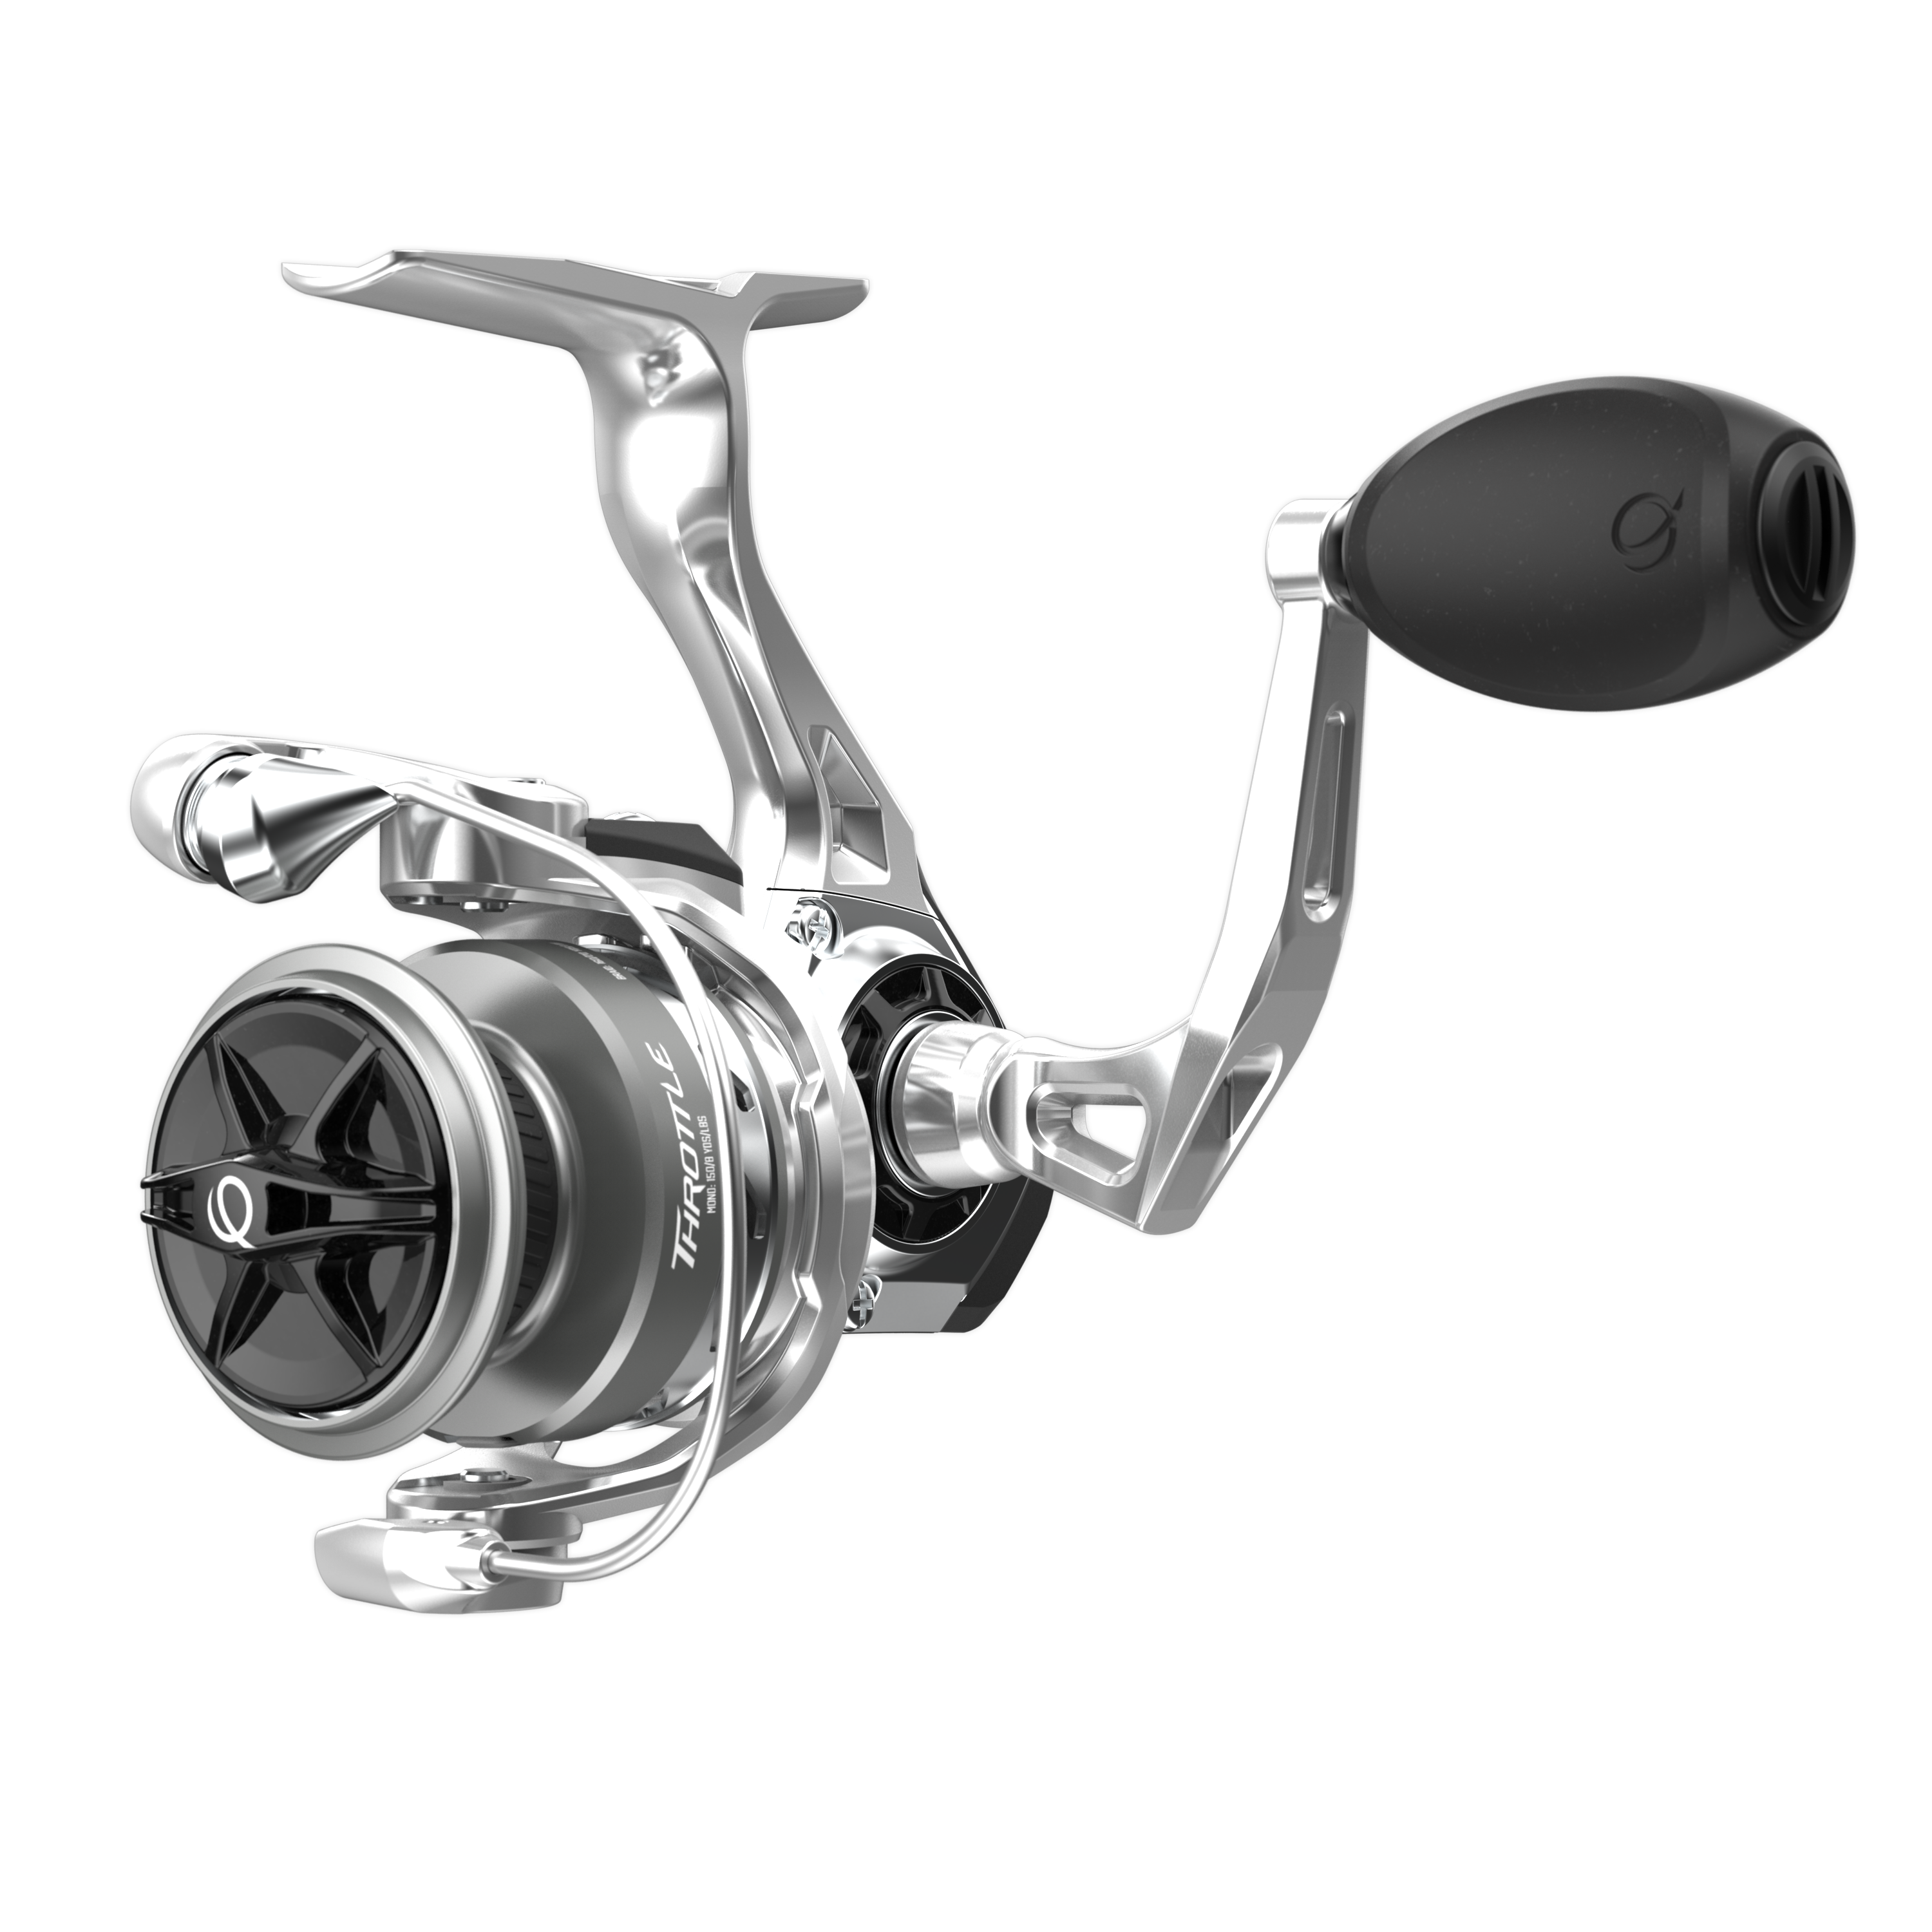 https://cs1.0ps.us/original/opplanet-quantum-throttle-spinning-reel-6-2-1-10-1-ambidextrous-size-30-silver-th30c-bx3-main